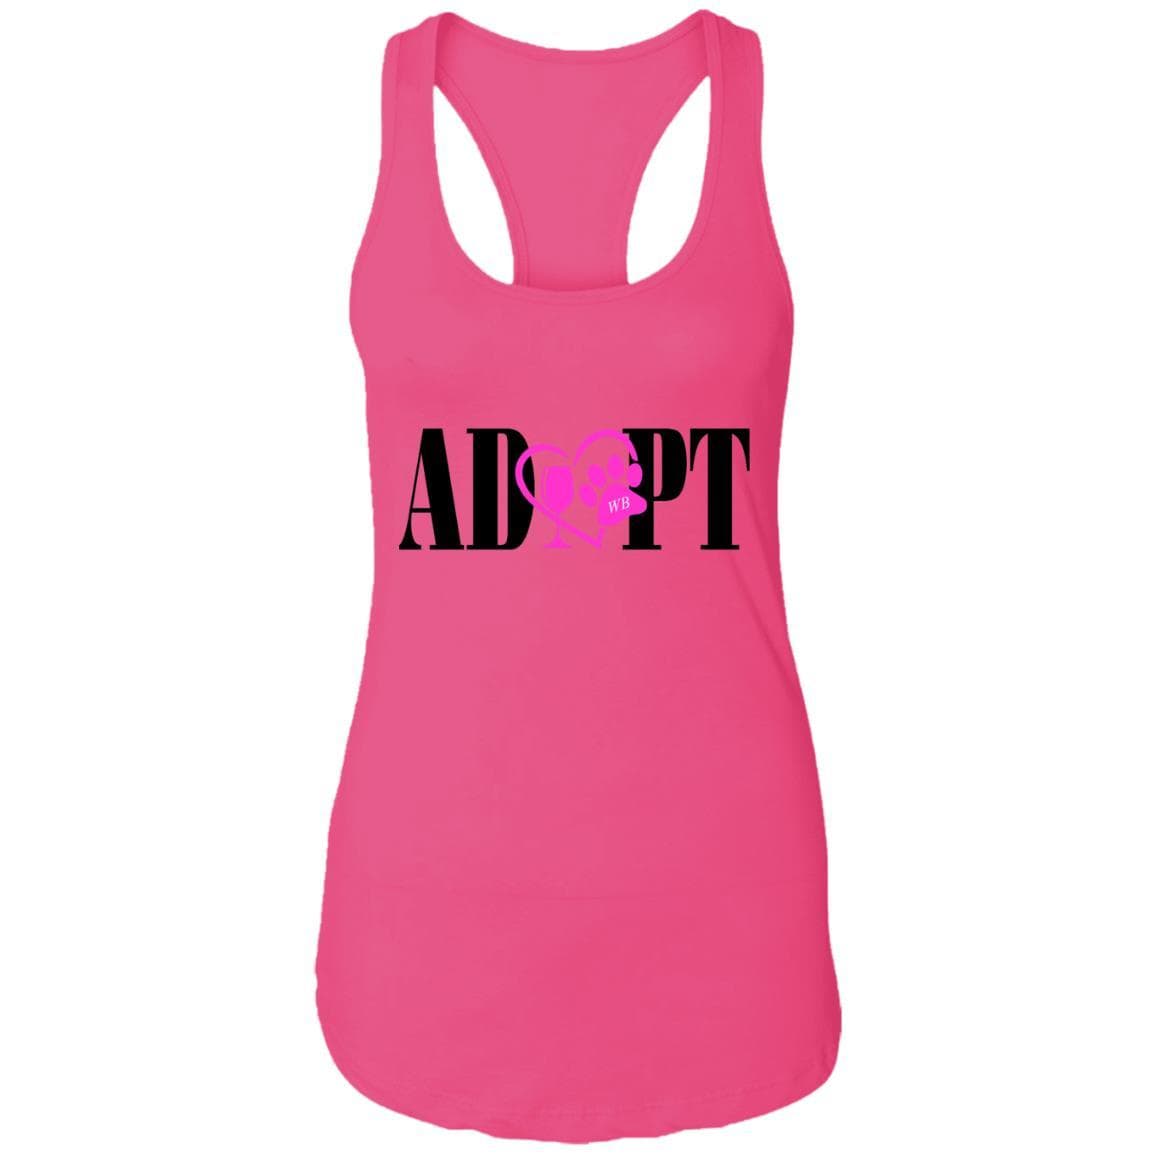 T-Shirts Raspberry / X-Small WineyBitches.Co “Adopt” Ladies Ideal Racerback Tank- Pink Heart- Blk Lettering WineyBitchesCo